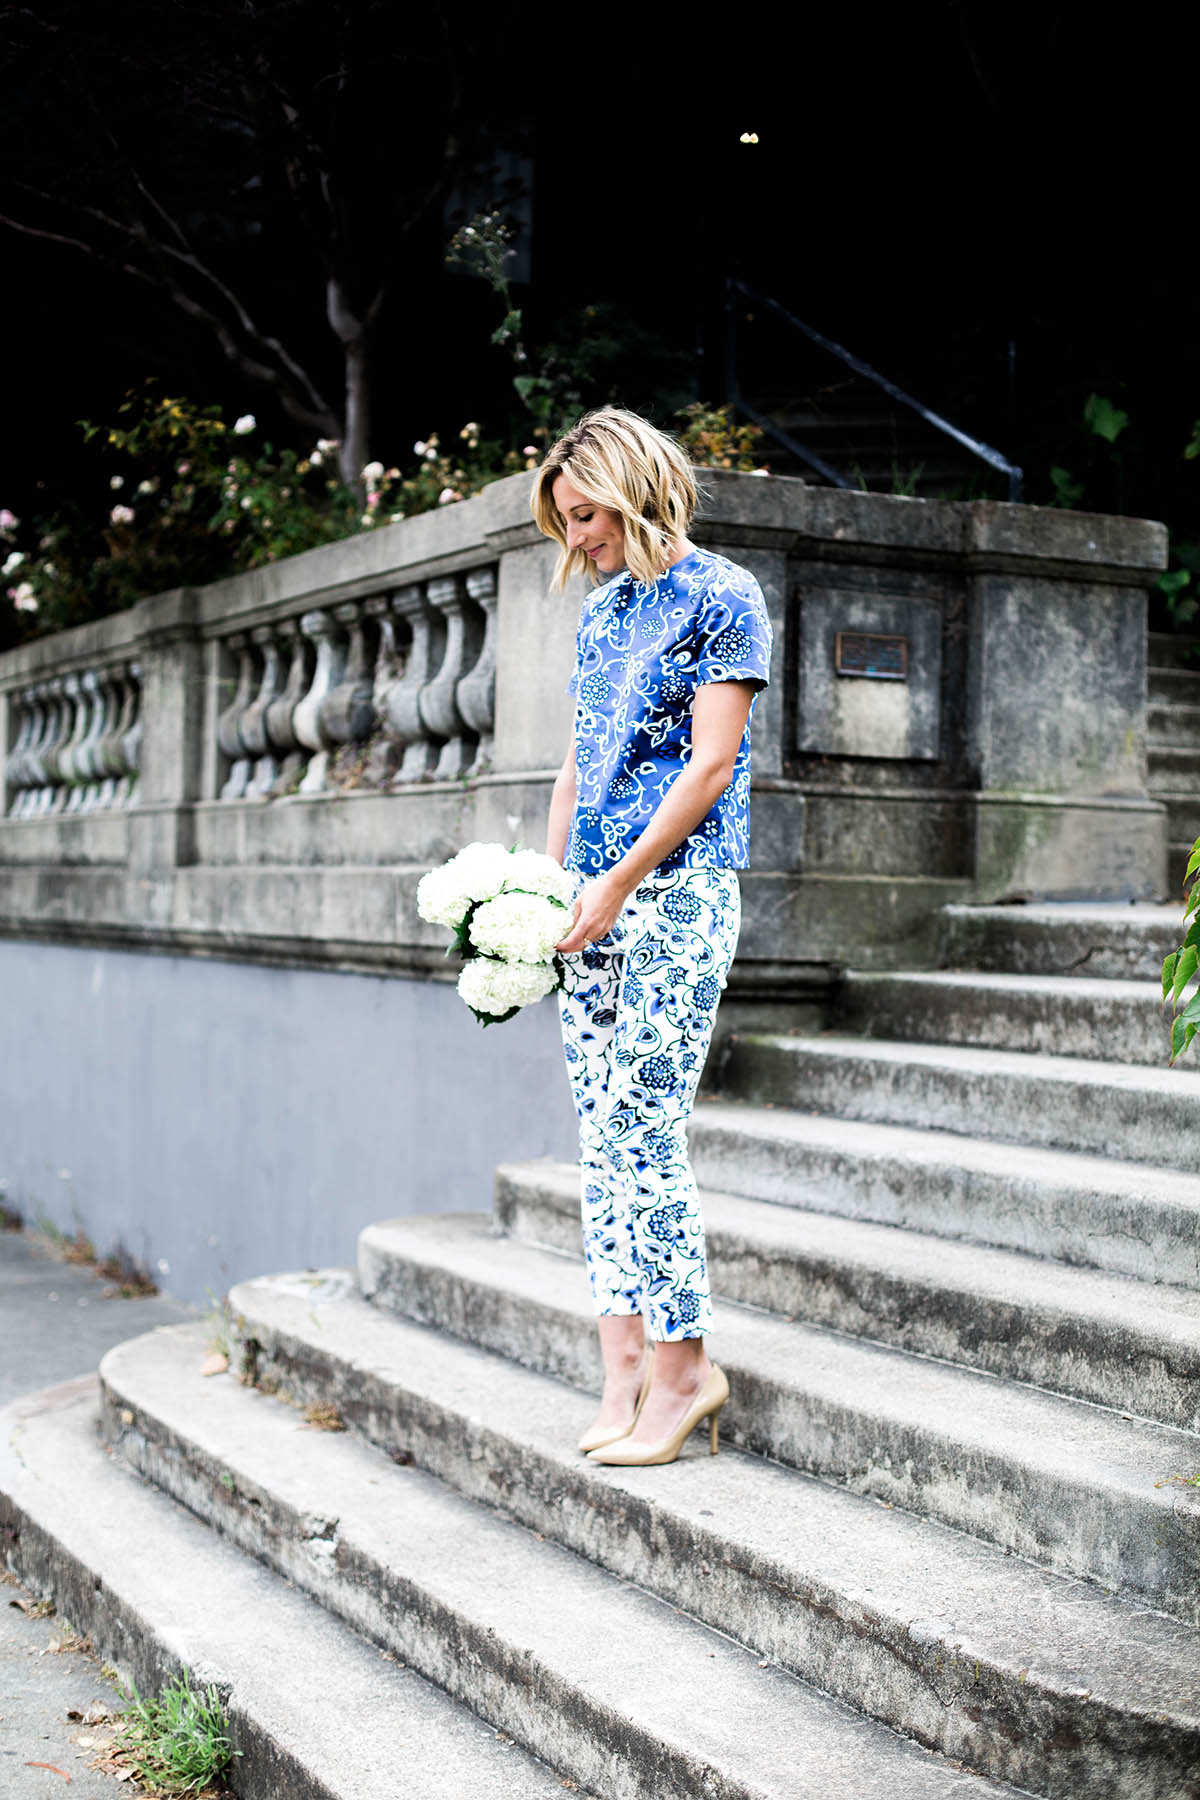 Amanda Holstein in Draper James Oak Hill Vine top and pants mixed prints outfit